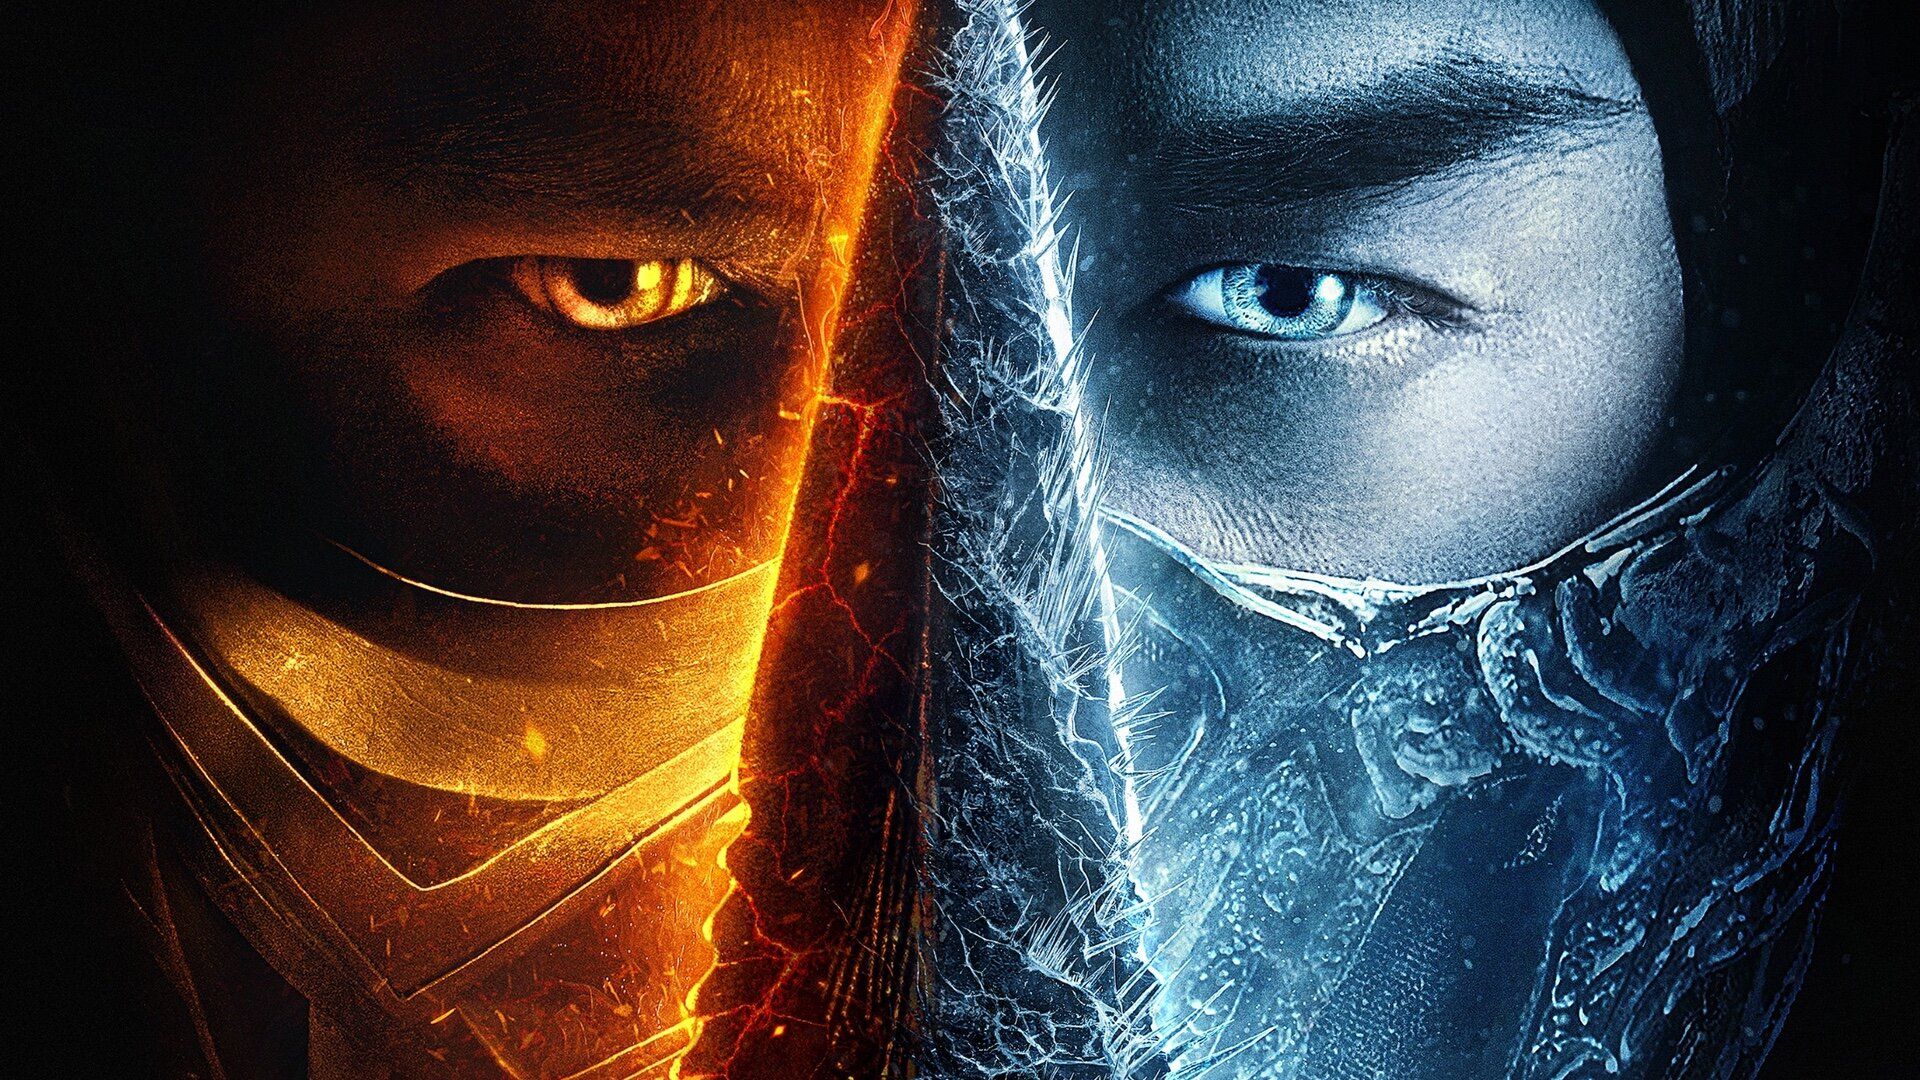 Get Over Here! New Poster For MORTAL KOMBAT Featuring Scorpion And Sub Zero